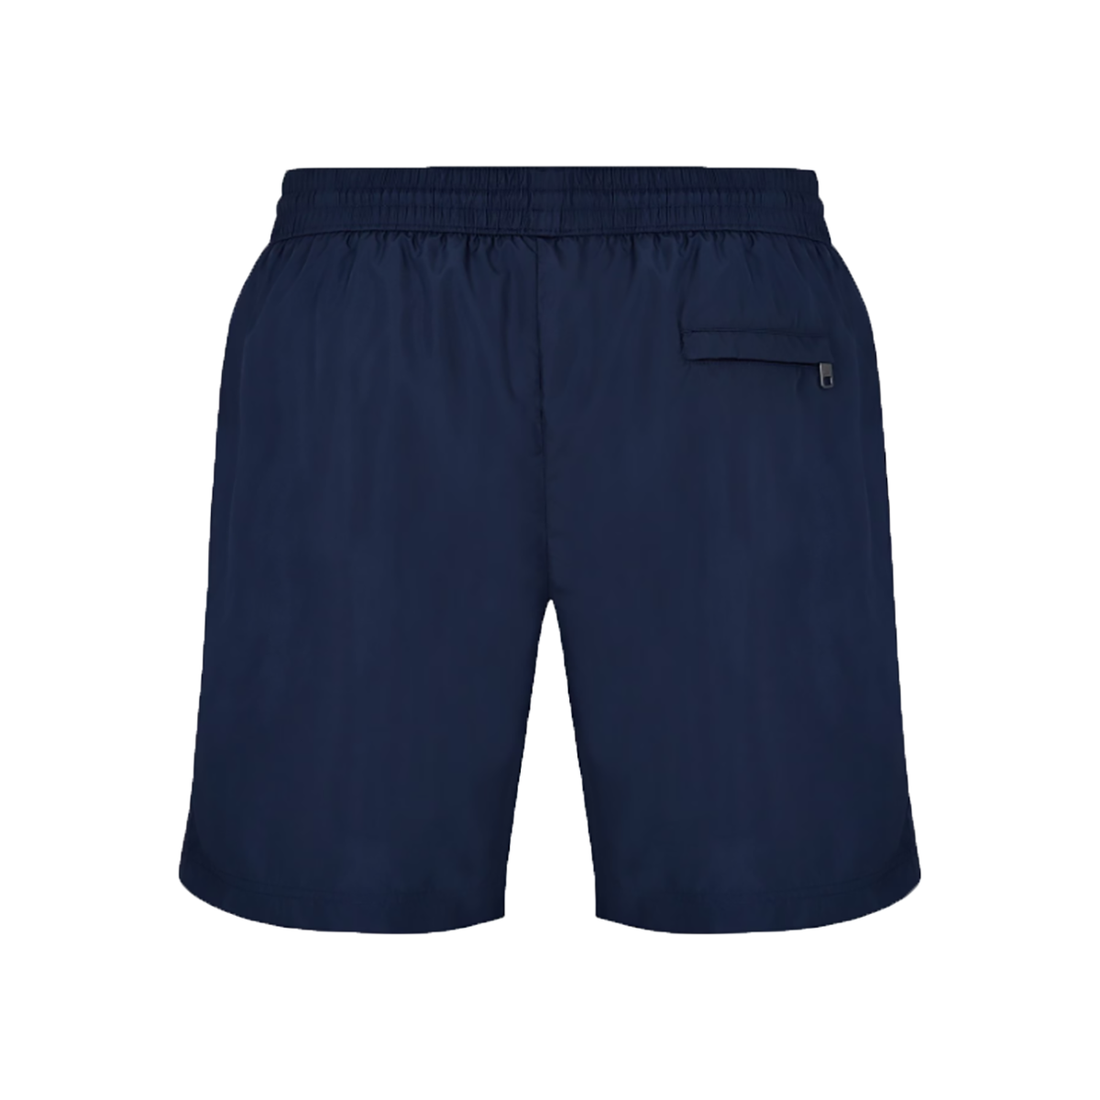 DOLCE AND GABBANA MID-LENGTH SWIM TRUNKS WITH BRANDED PLATE IN BLUE